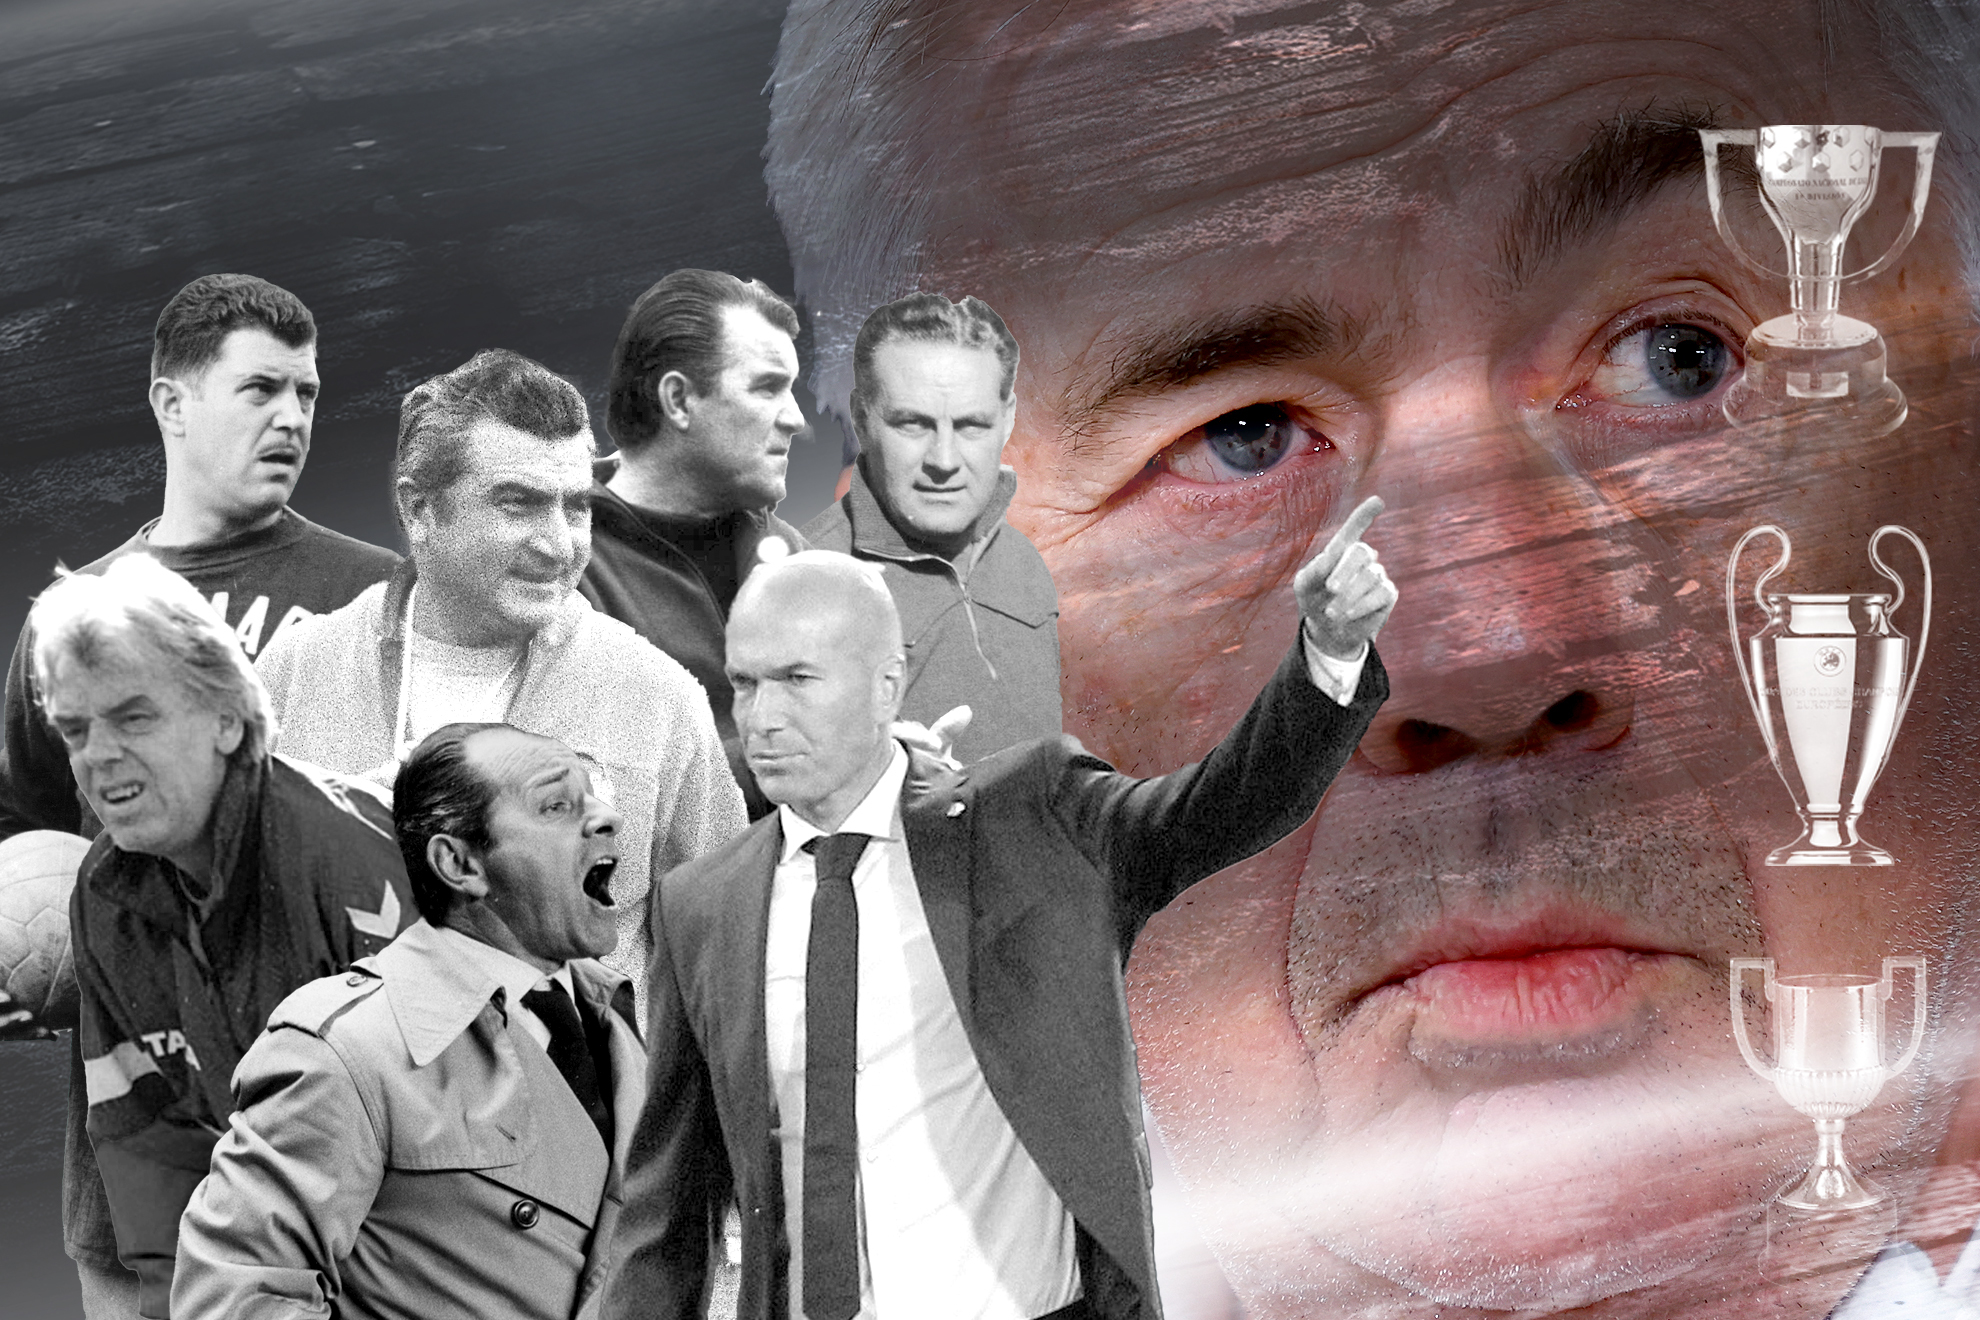 Ancelotti must win the treble to complete his final Real Madrid challenge